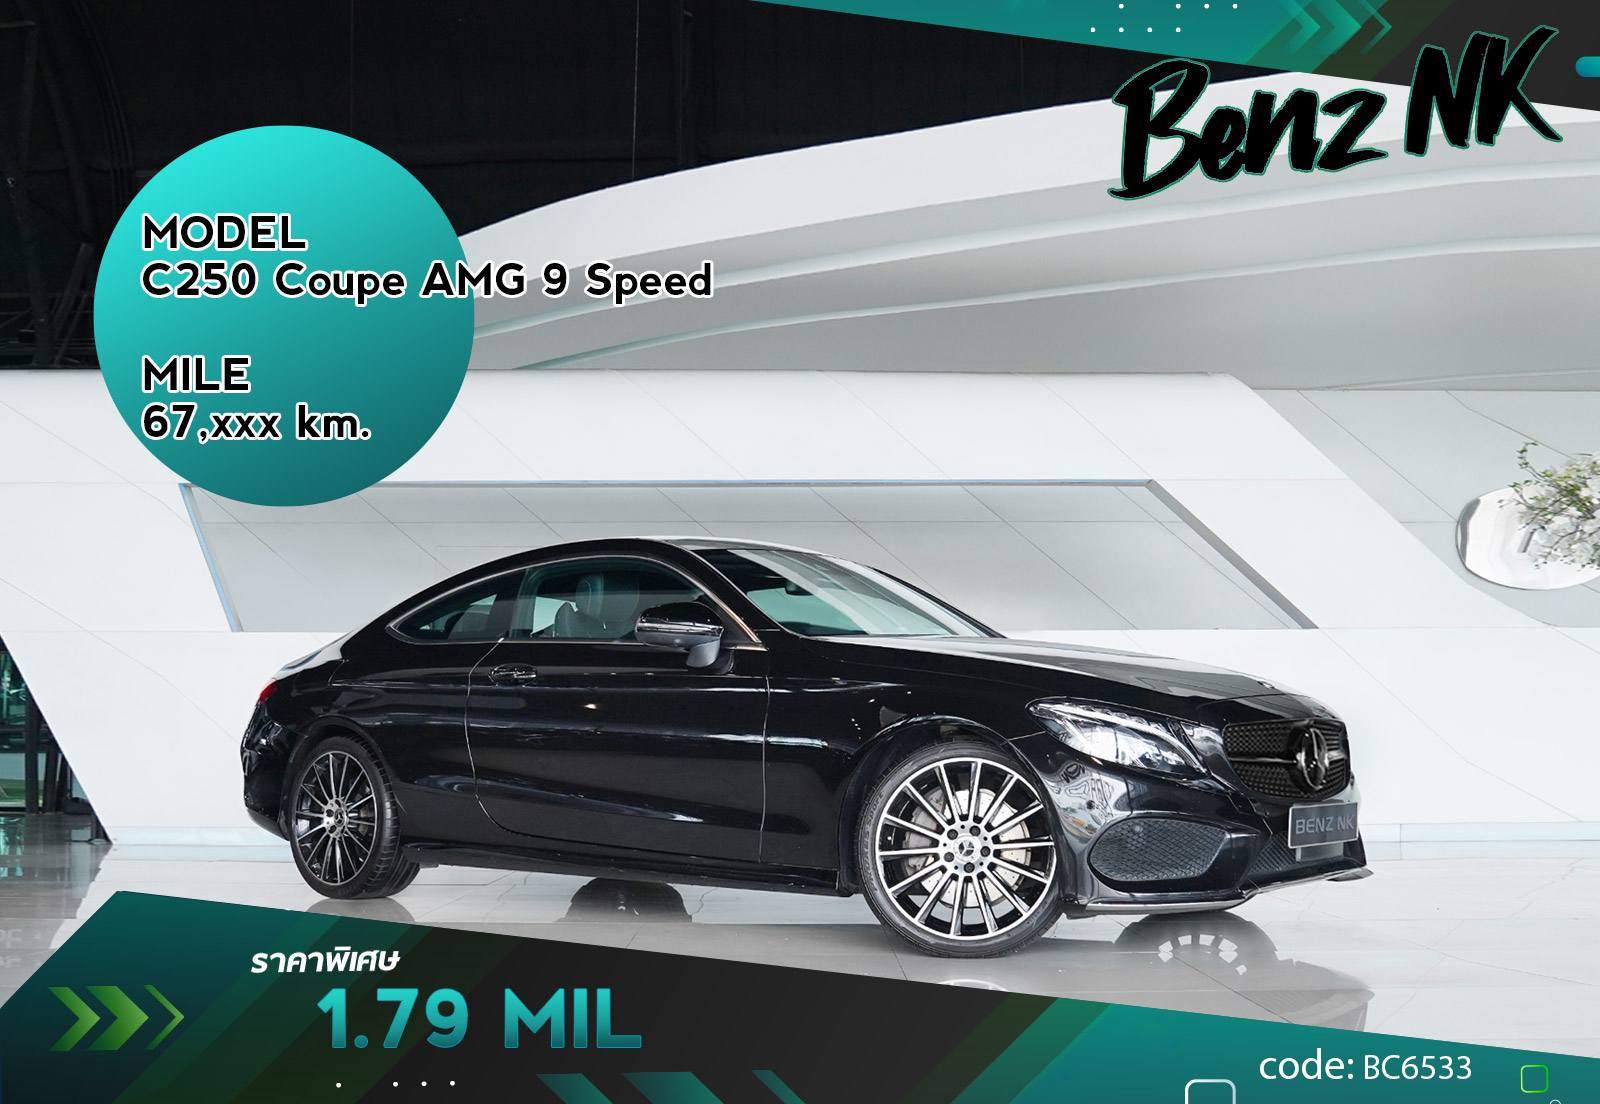 C250 Coupe AMG 9Speed Mercedes Benz